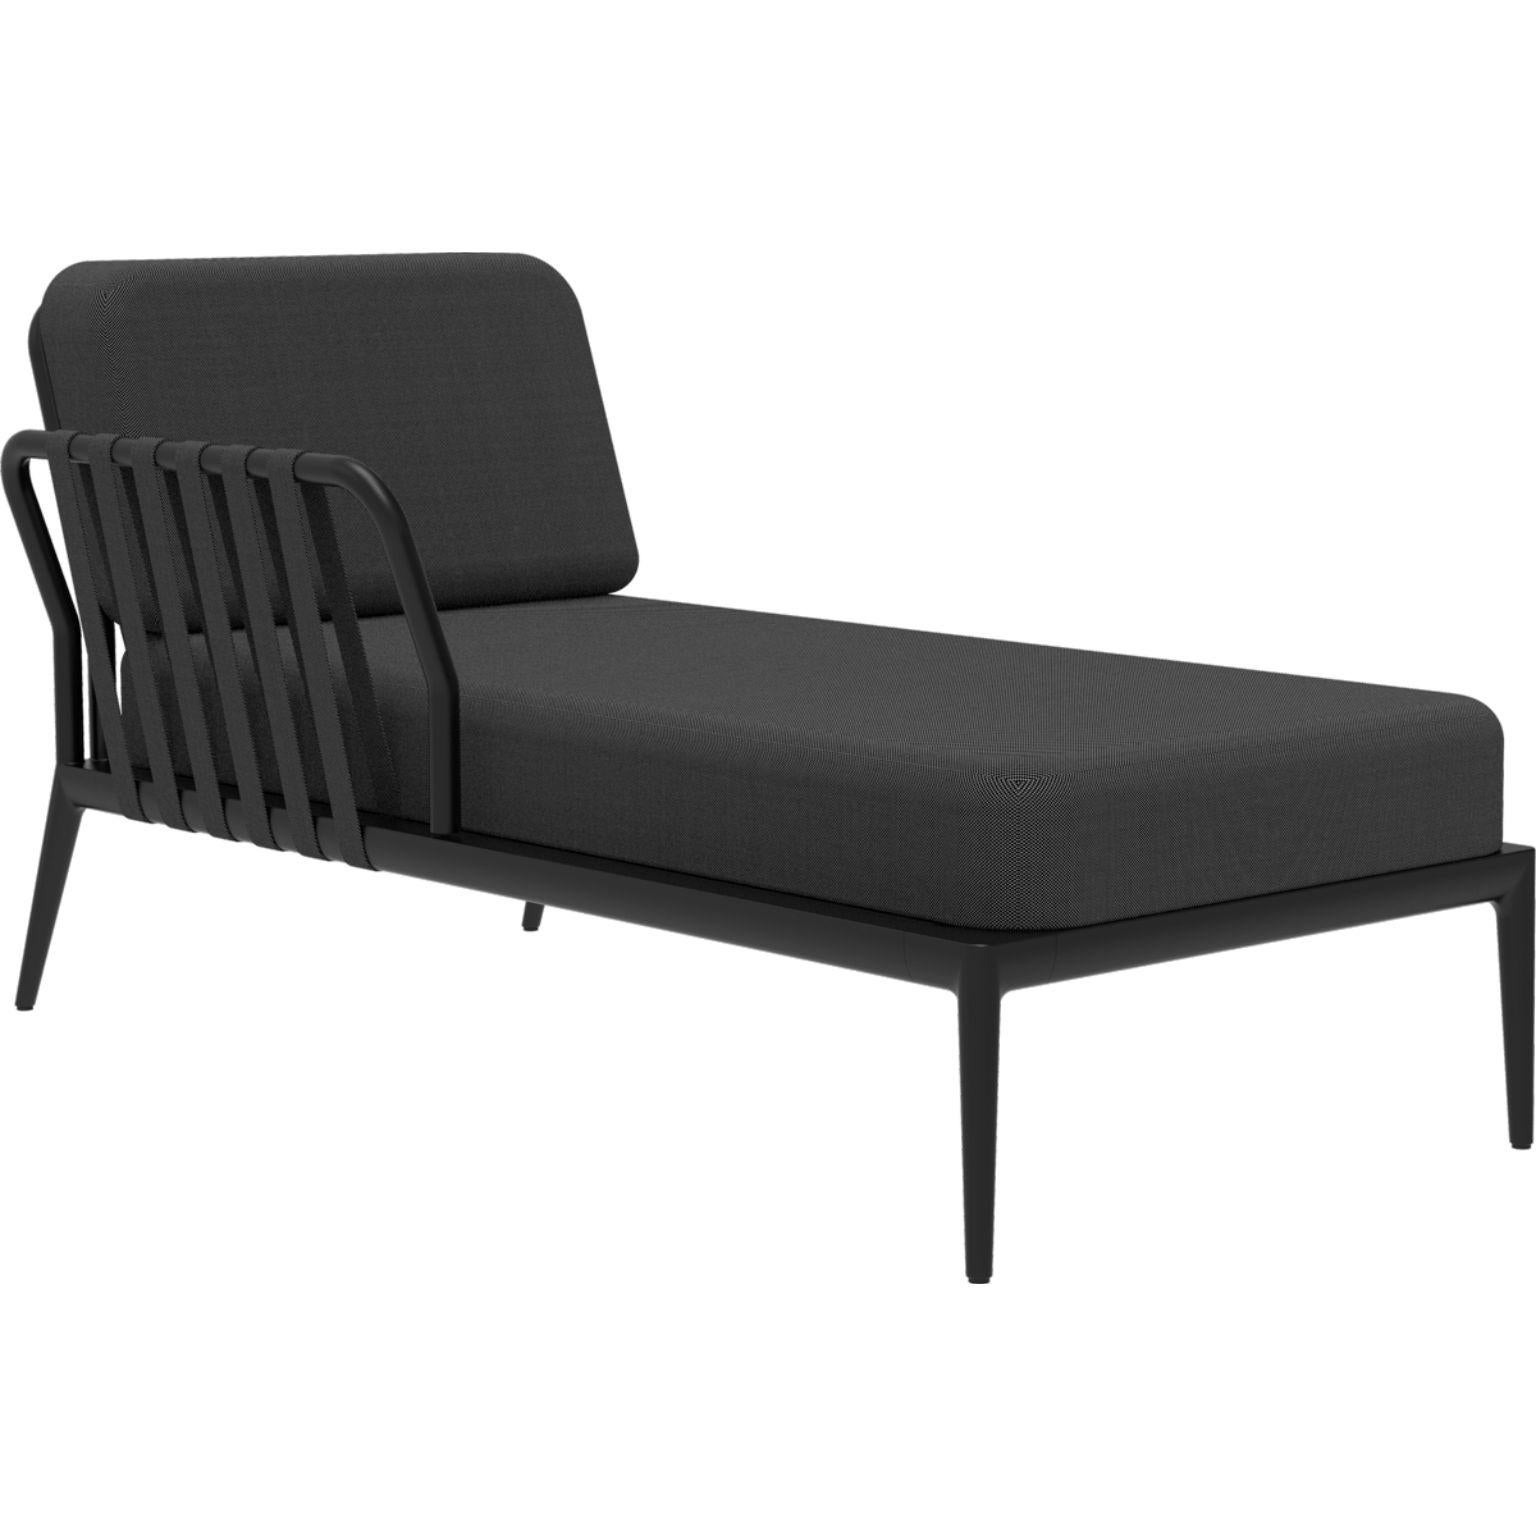 Ribbons black right chaise longue by MOWEE
Dimensions: D80 x W155 x H81 cm
Material: Aluminum, Upholstery
Weight: 28 kg
Also Available in different colours and finishes. 

An unmistakable collection for its beauty and robustness. A tribute to